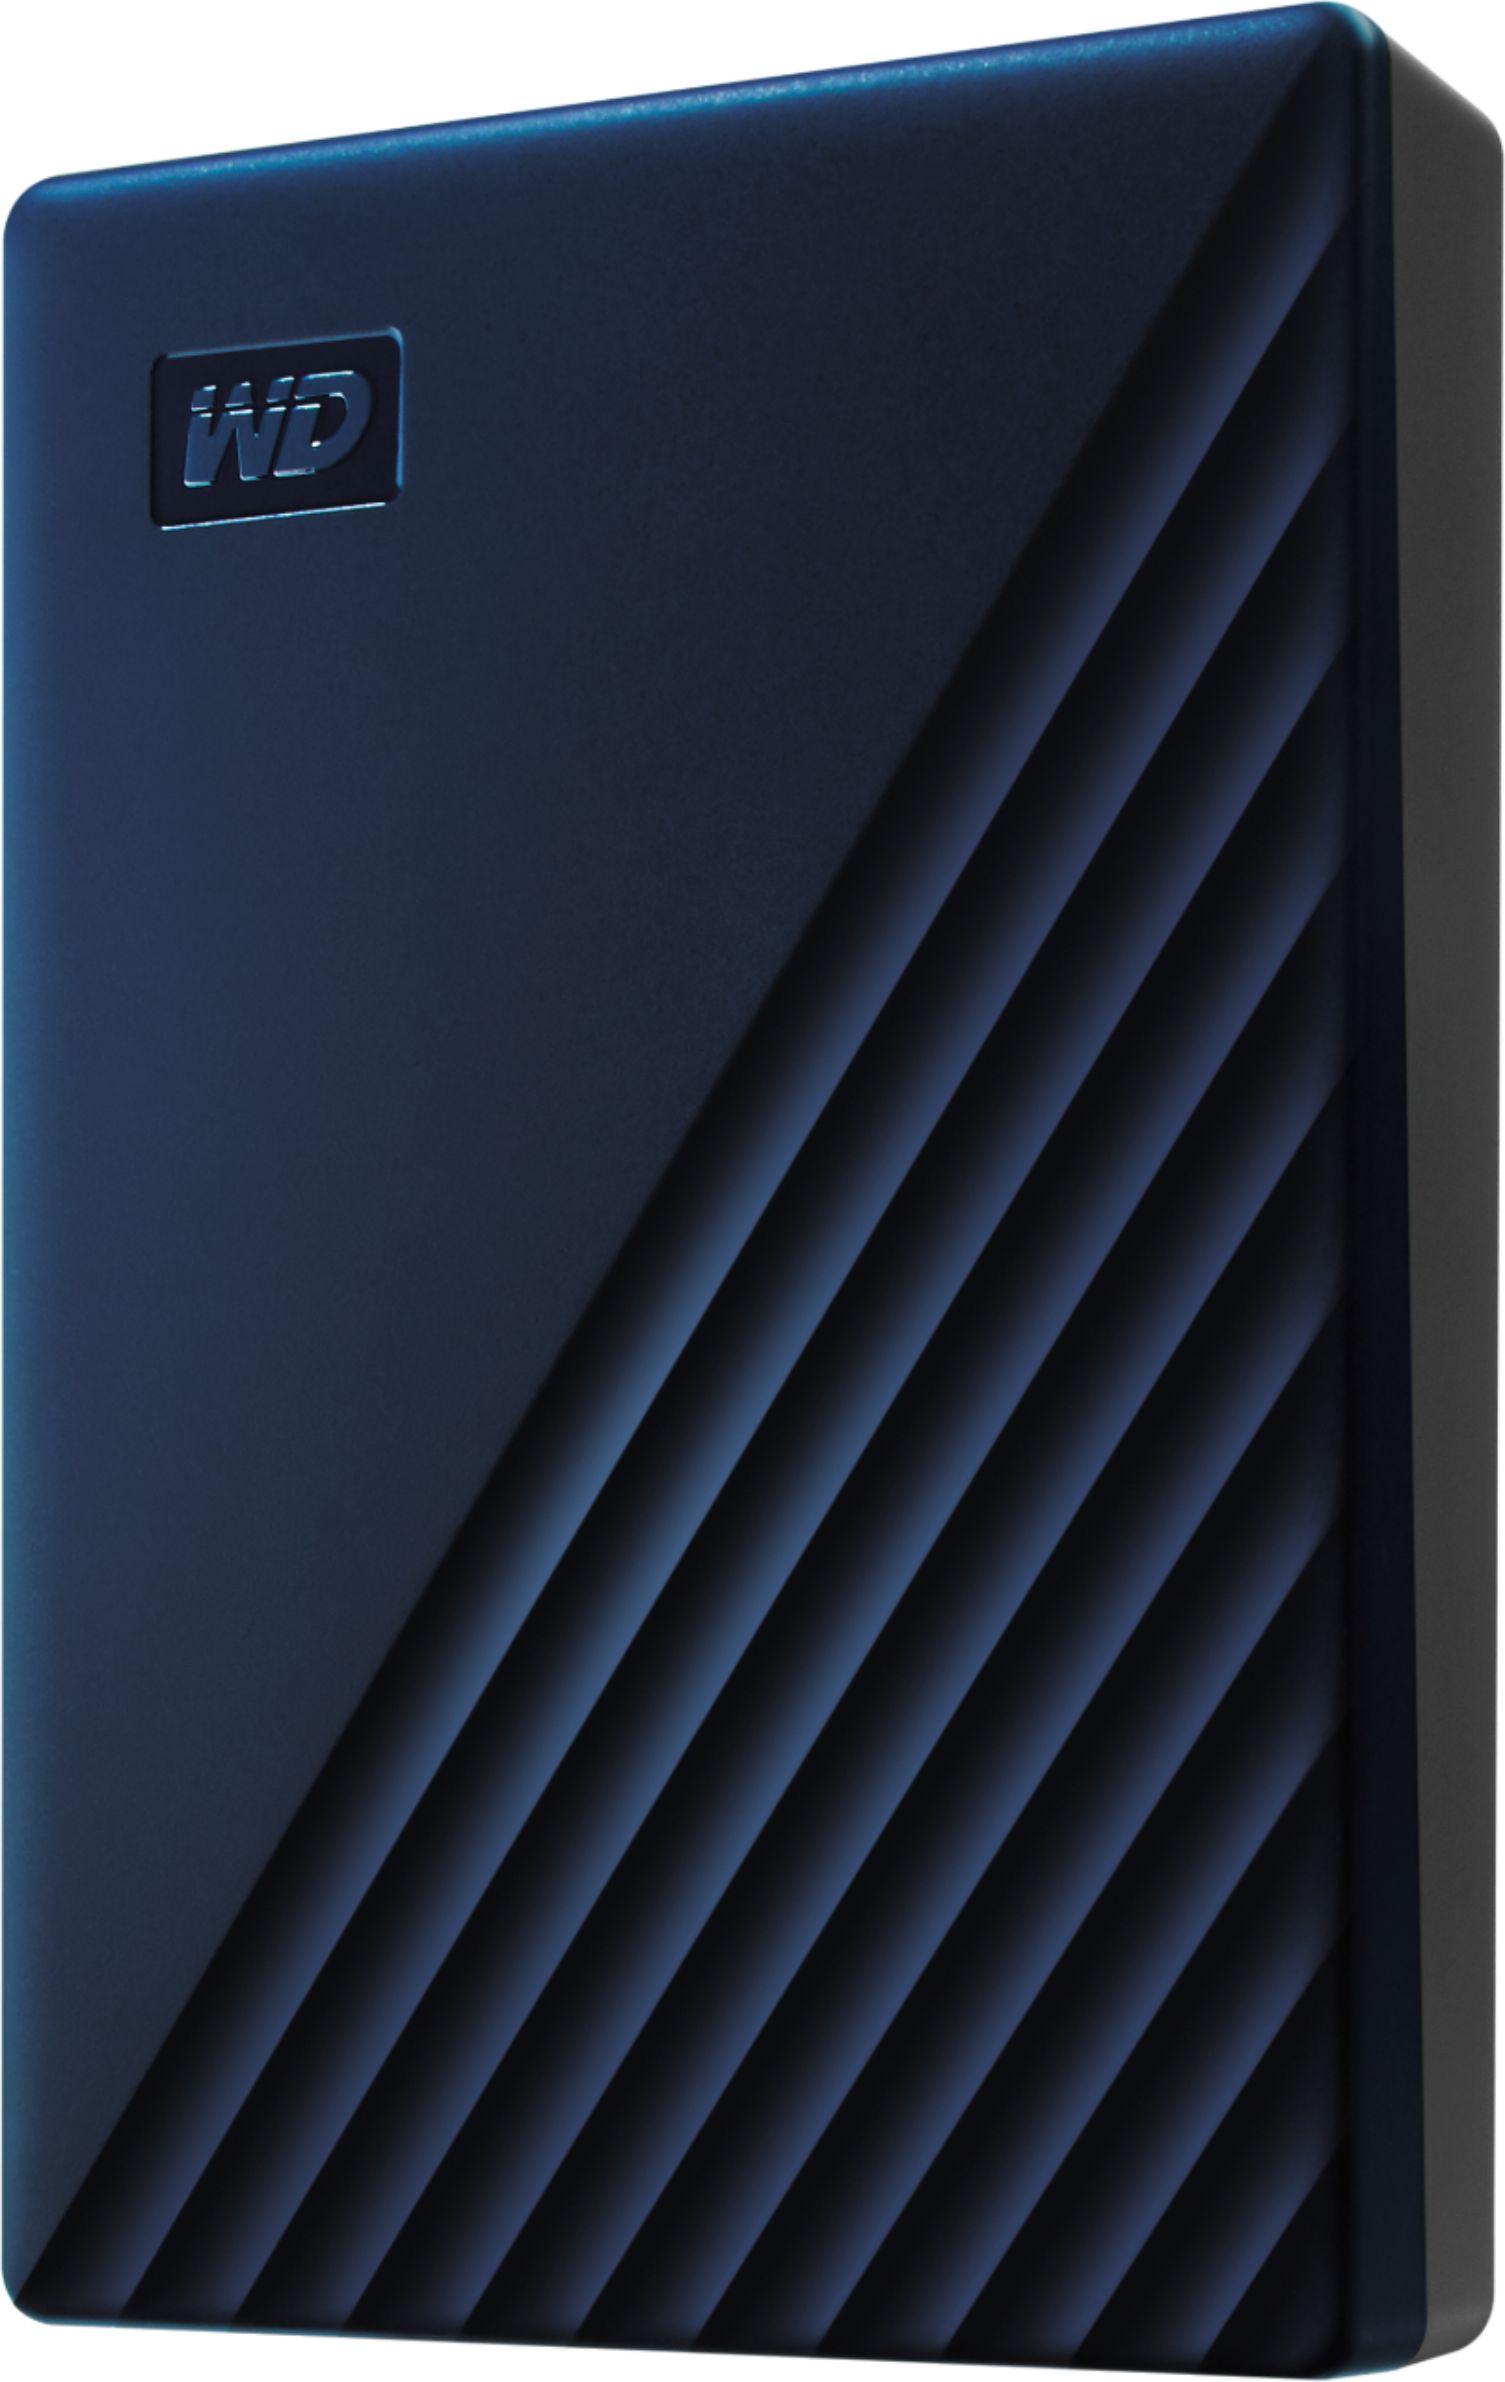 WD My Passport for 4TB External 3.0 Portable Hard Drive Blue WDBA2F0040BBL-WESN - Best Buy